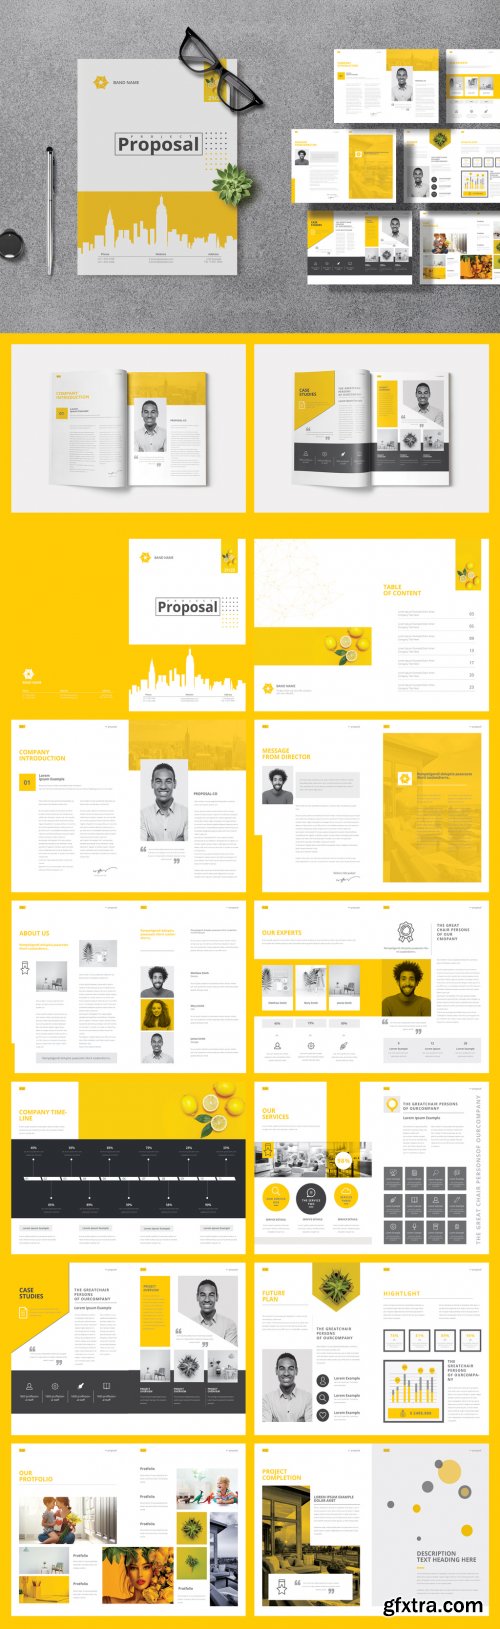 Project Proposal Layout with Yellow Accents 358159559